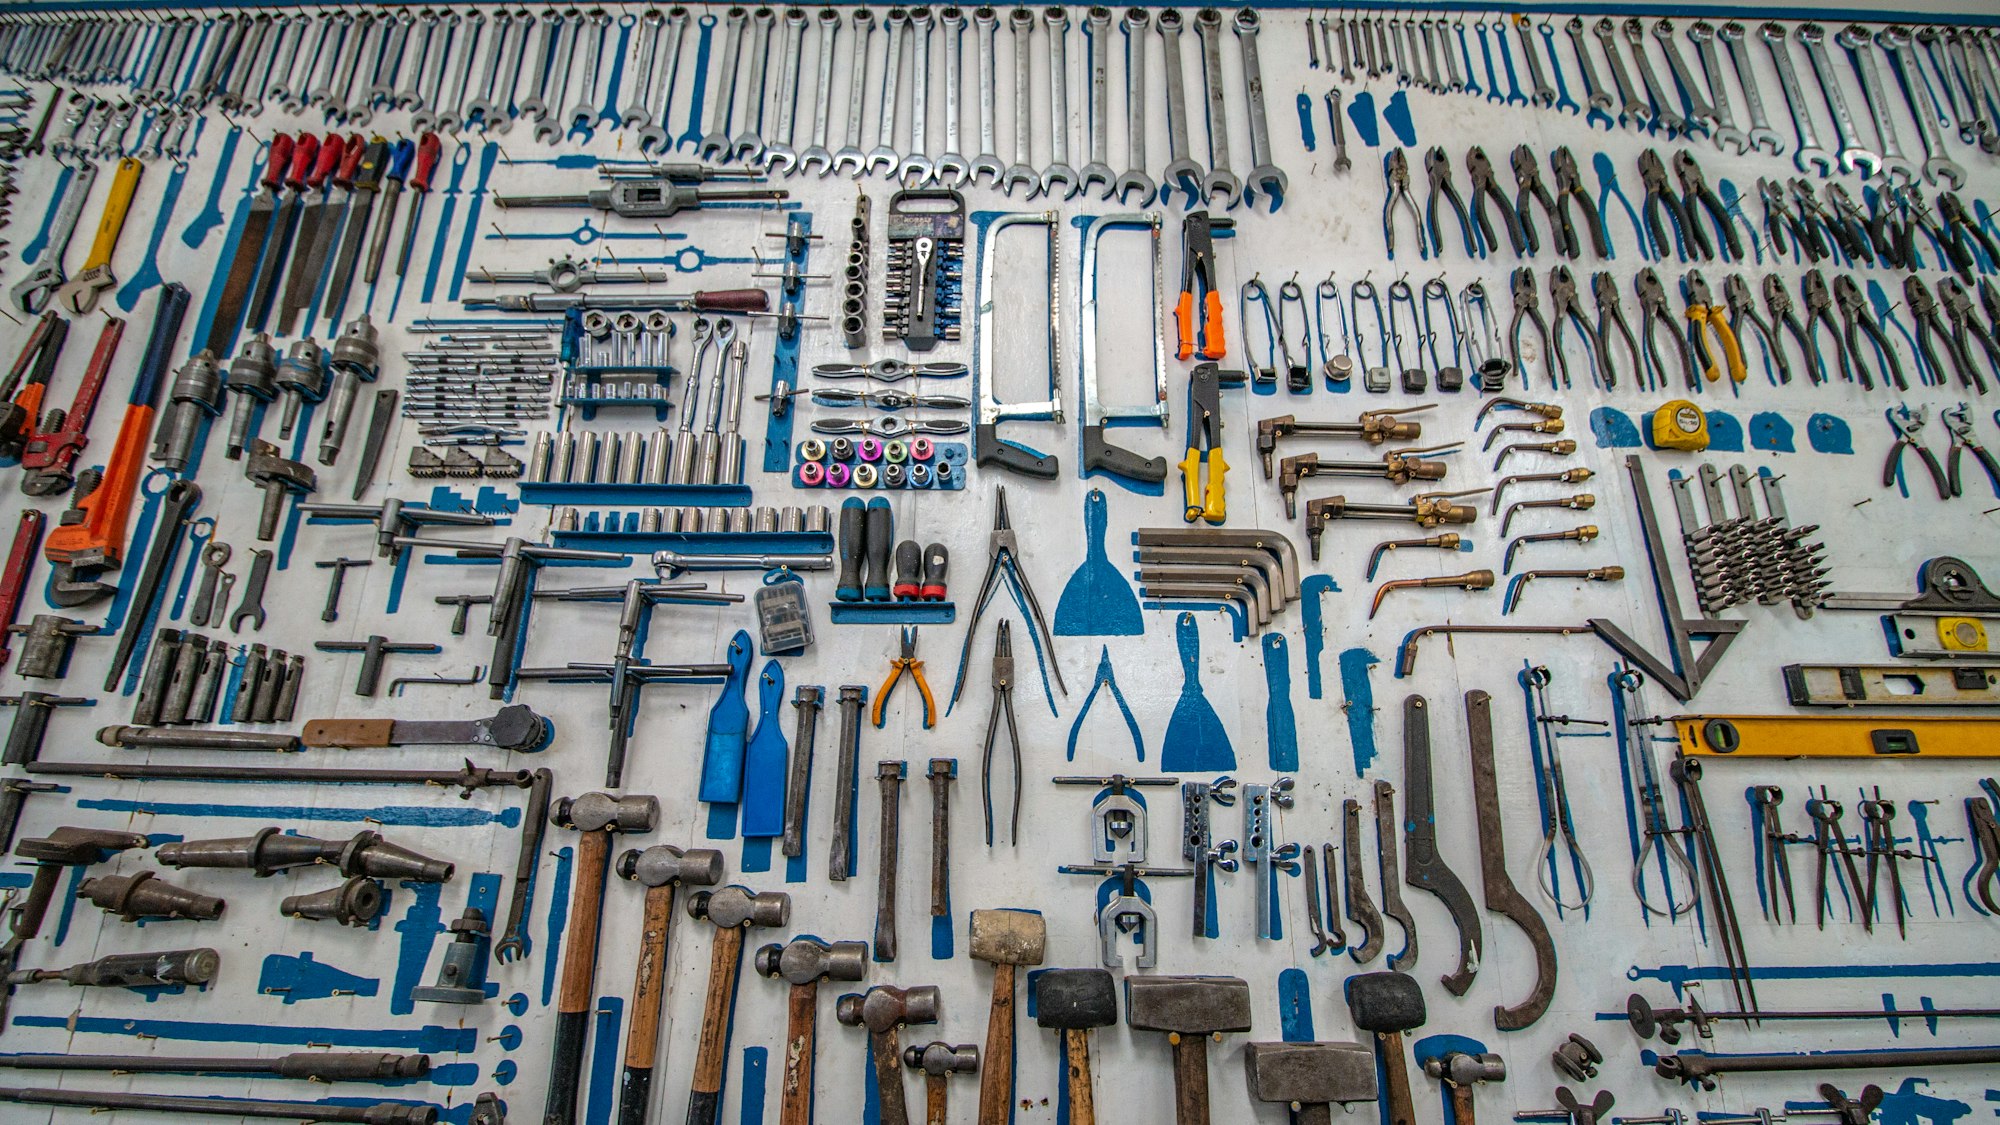 A large array of tools laid out neatly.